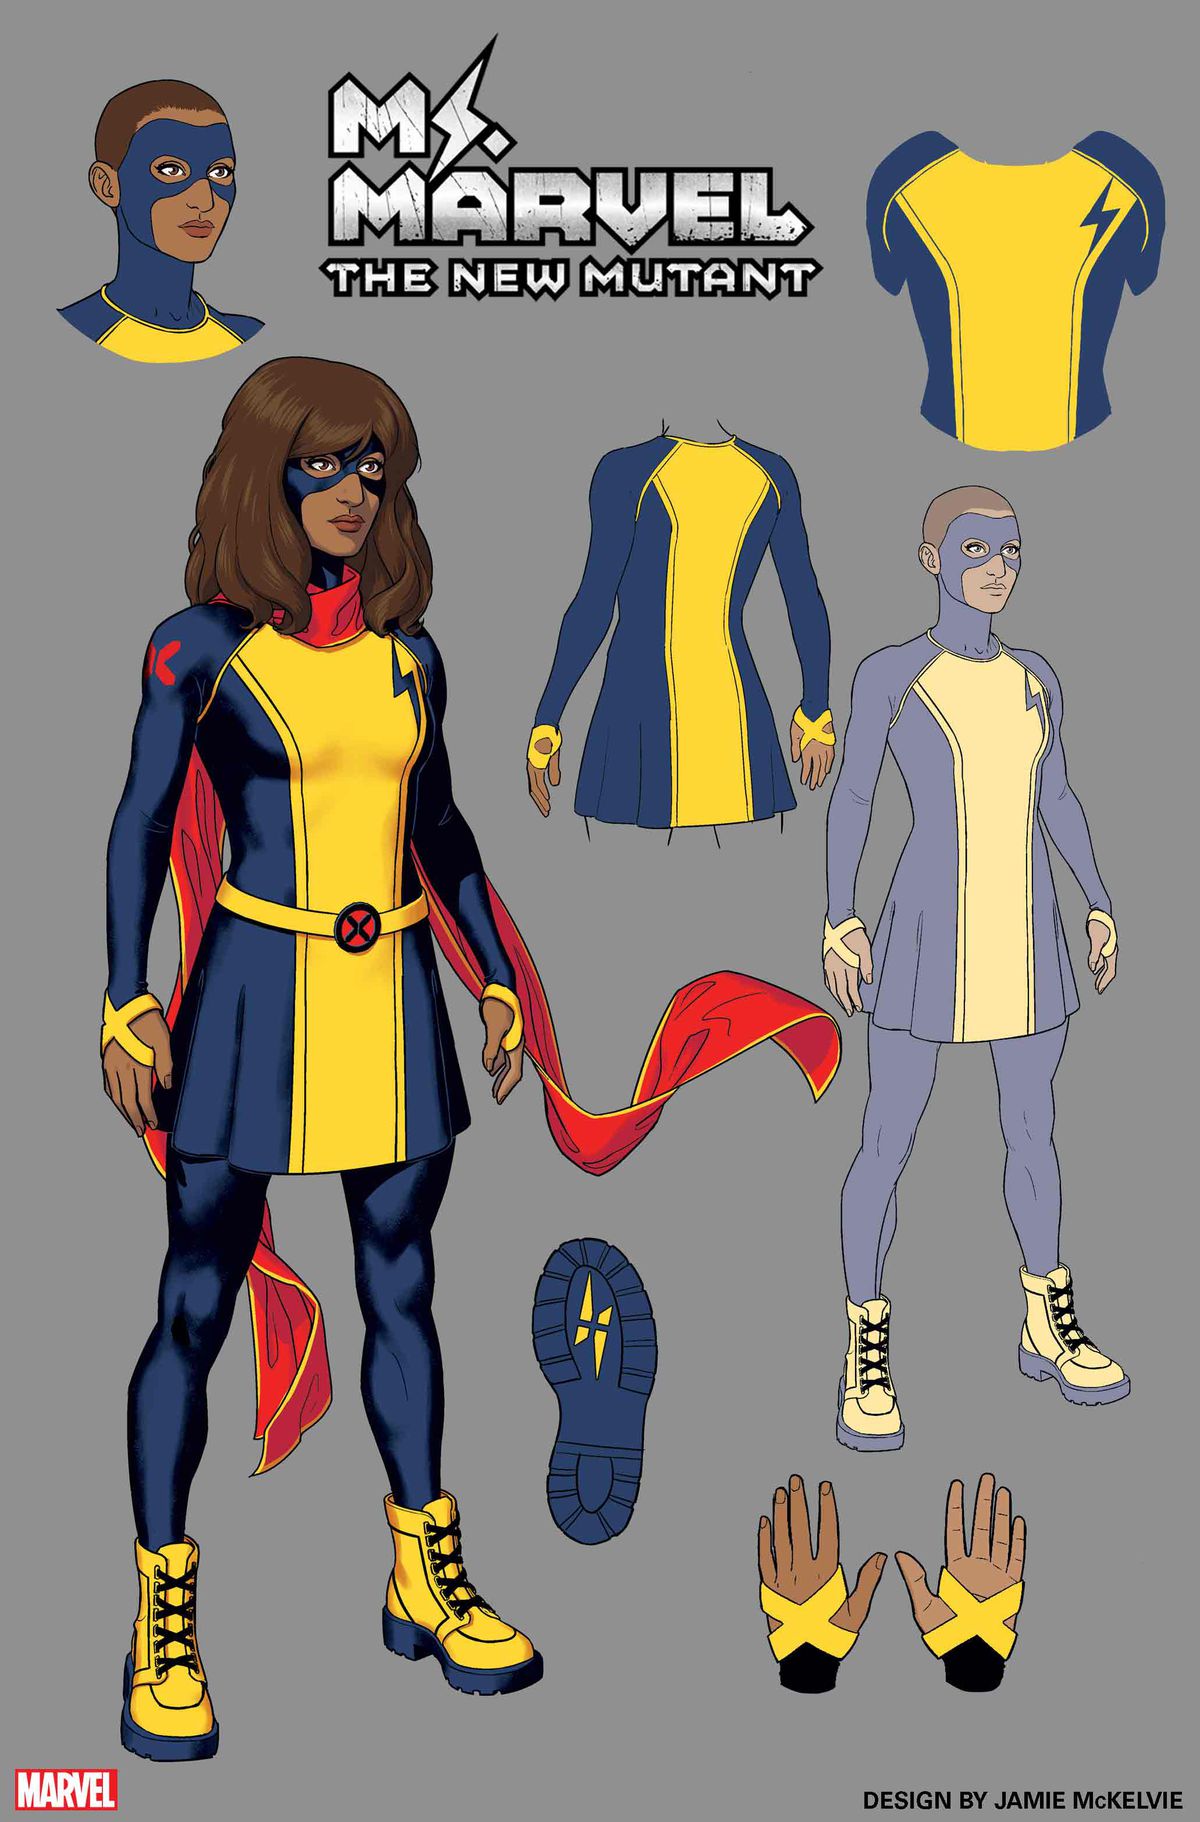 Character design of Ms. Marvel’s new X-Men-style costume and all it’s details.